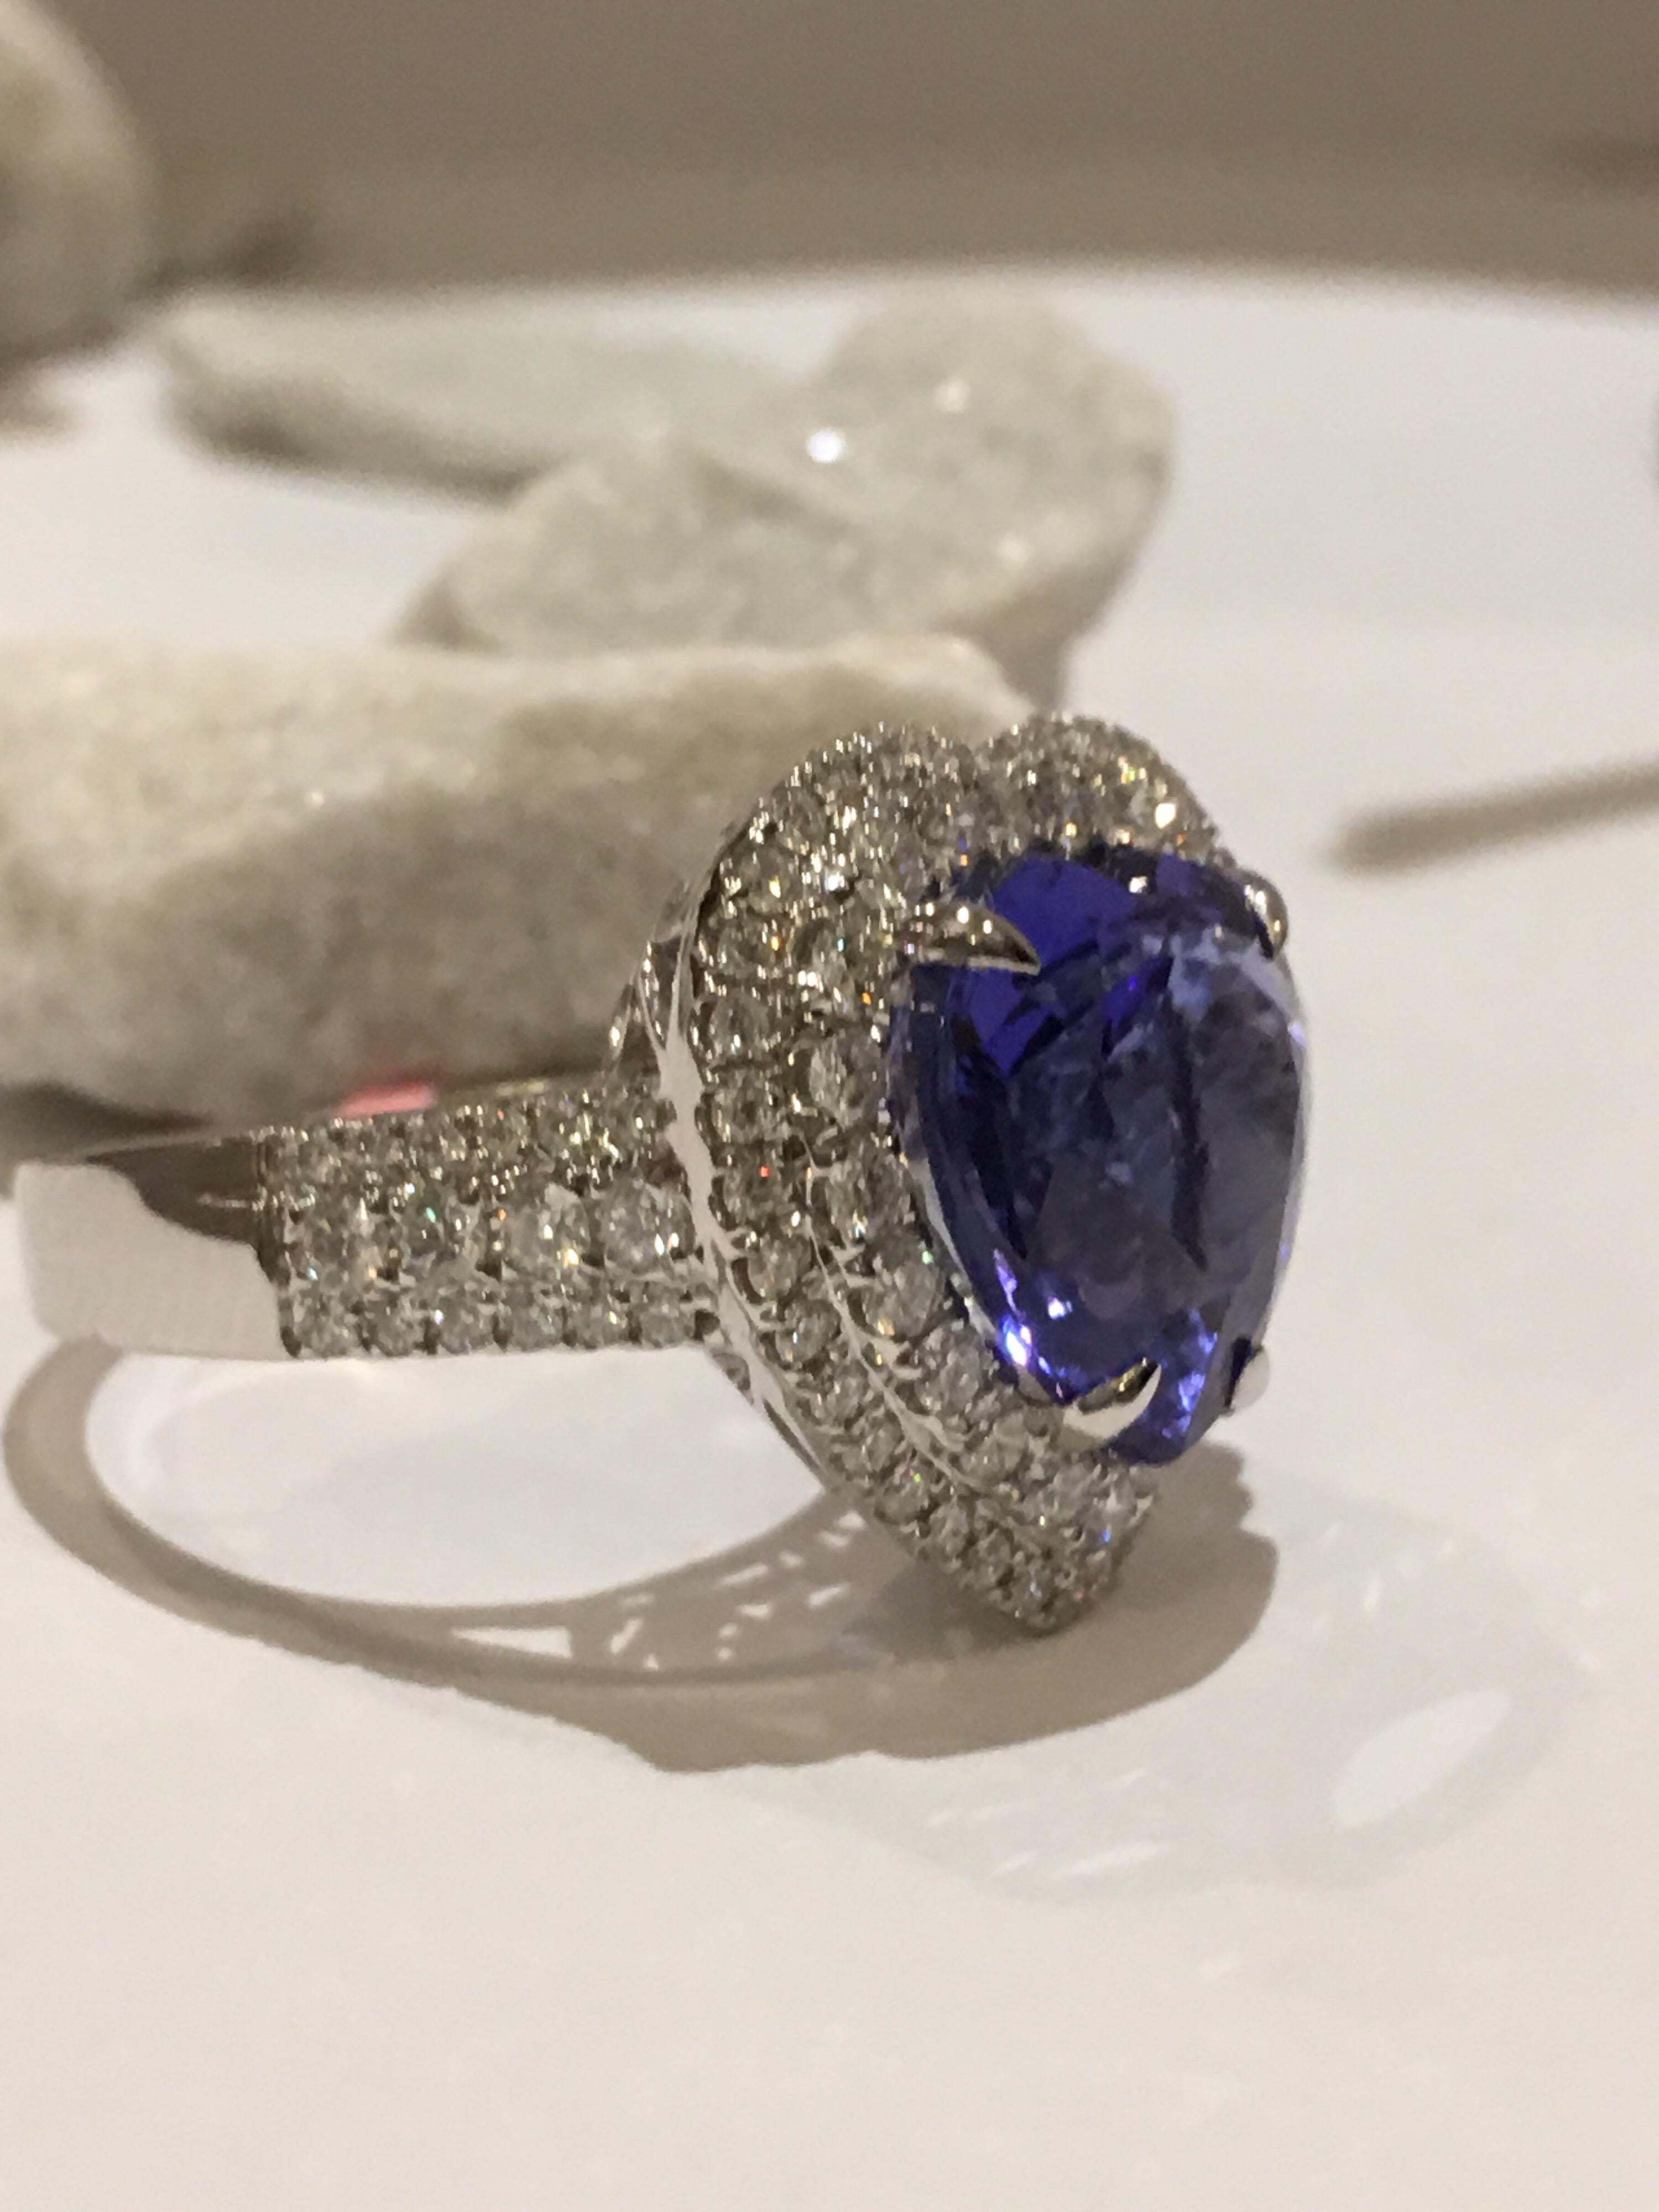 Natural Heart shape 6.73 Carat Tanzanite set in 14K White Gold  with 1.13 Carat White Diamond.
The ring with Double Halo setting is one of a kind hand crafted Ring.
The size of the Ring is 7 and this Ring can be resized.
